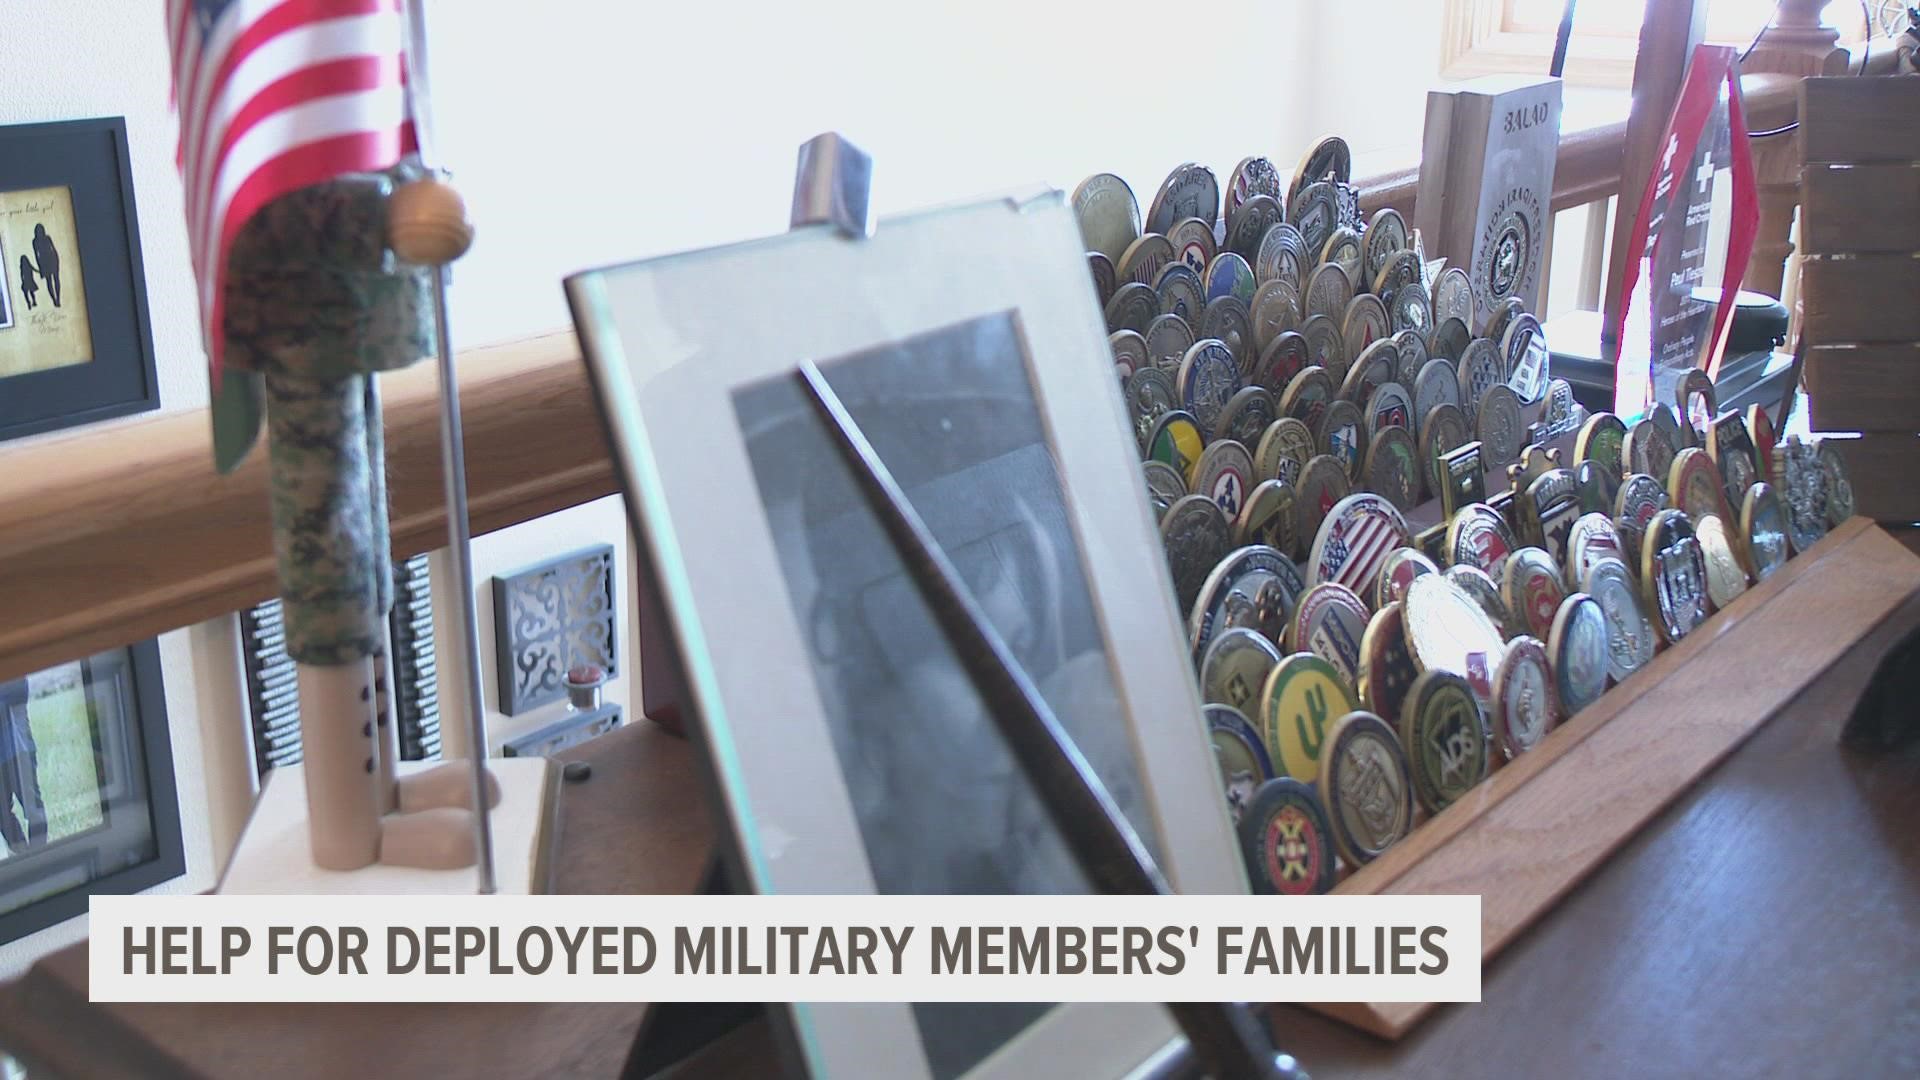 Preparing for the deployment of a loved one can be difficult. An Iowa woman shares what helped her through it.